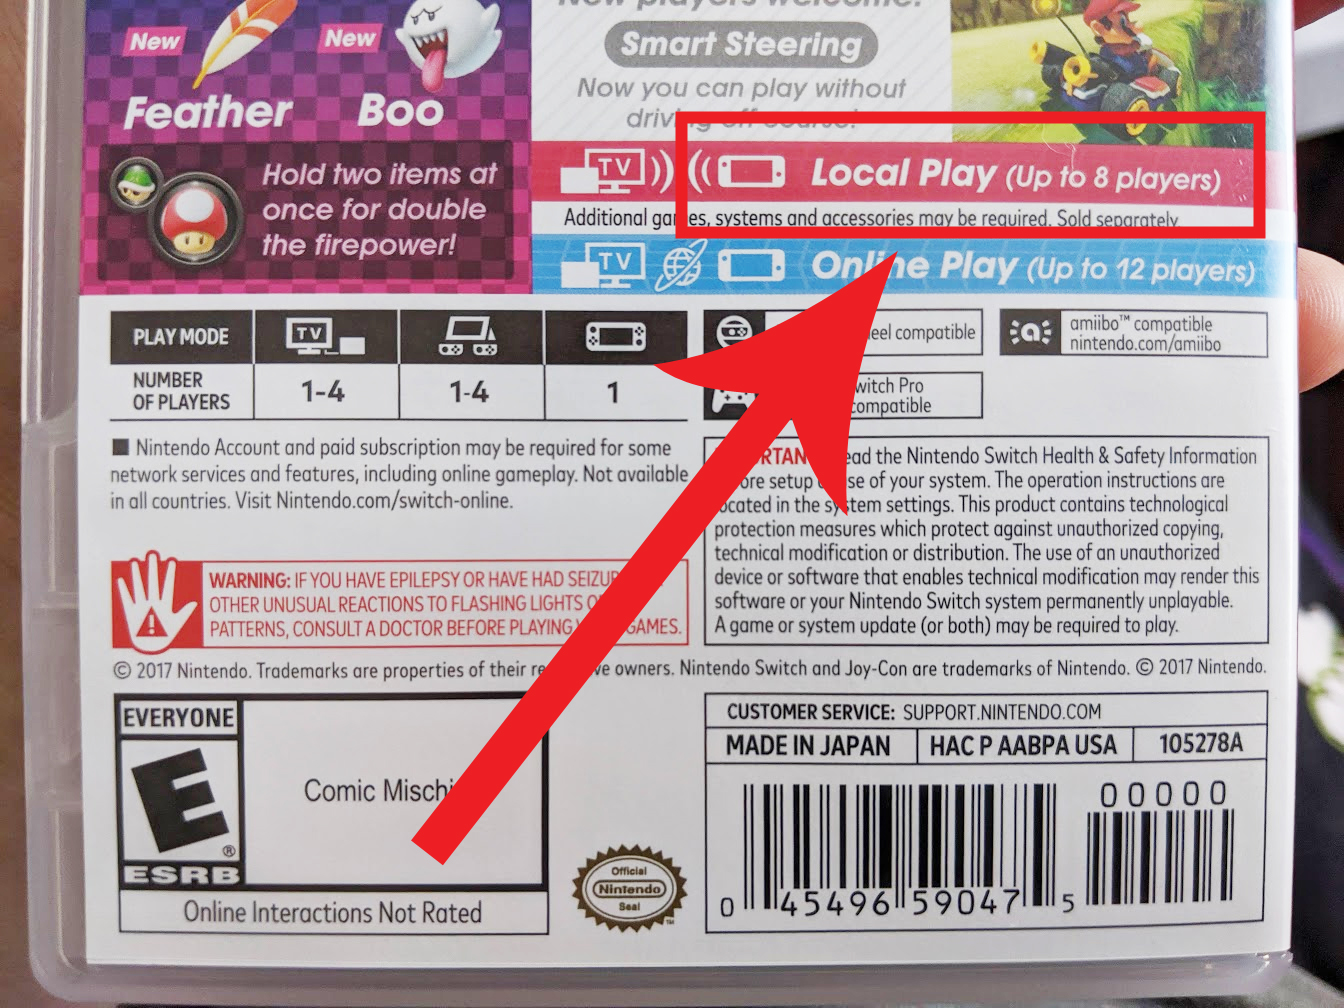 Pointing to local play section on back of Mario Kart 8 Deluxe box